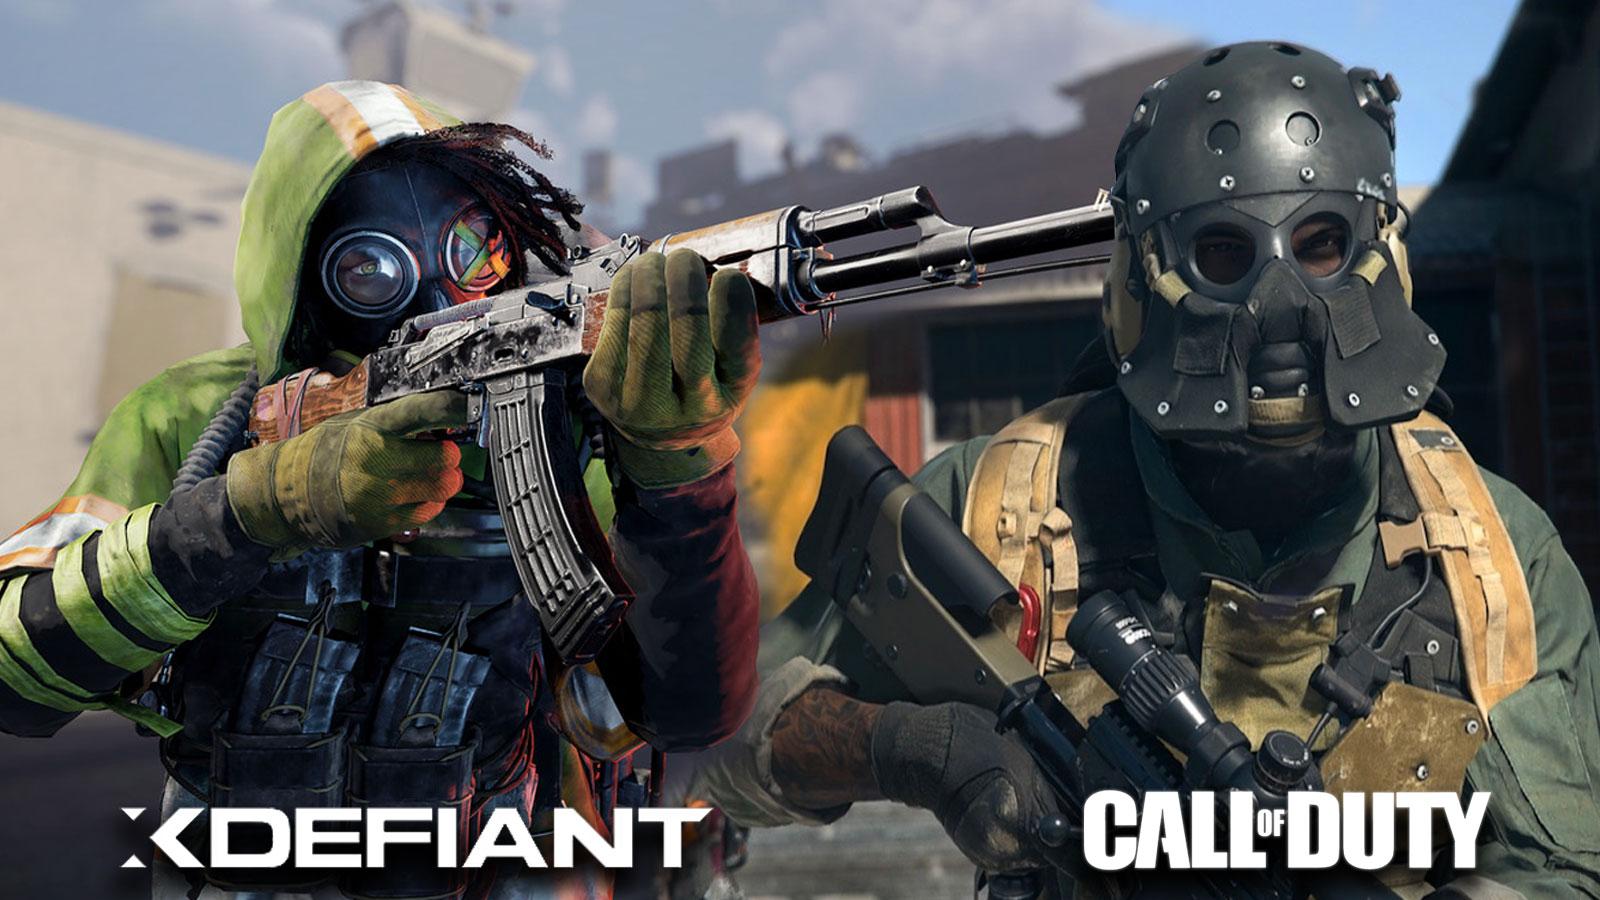 Characters from Call of Duty and XDefiant